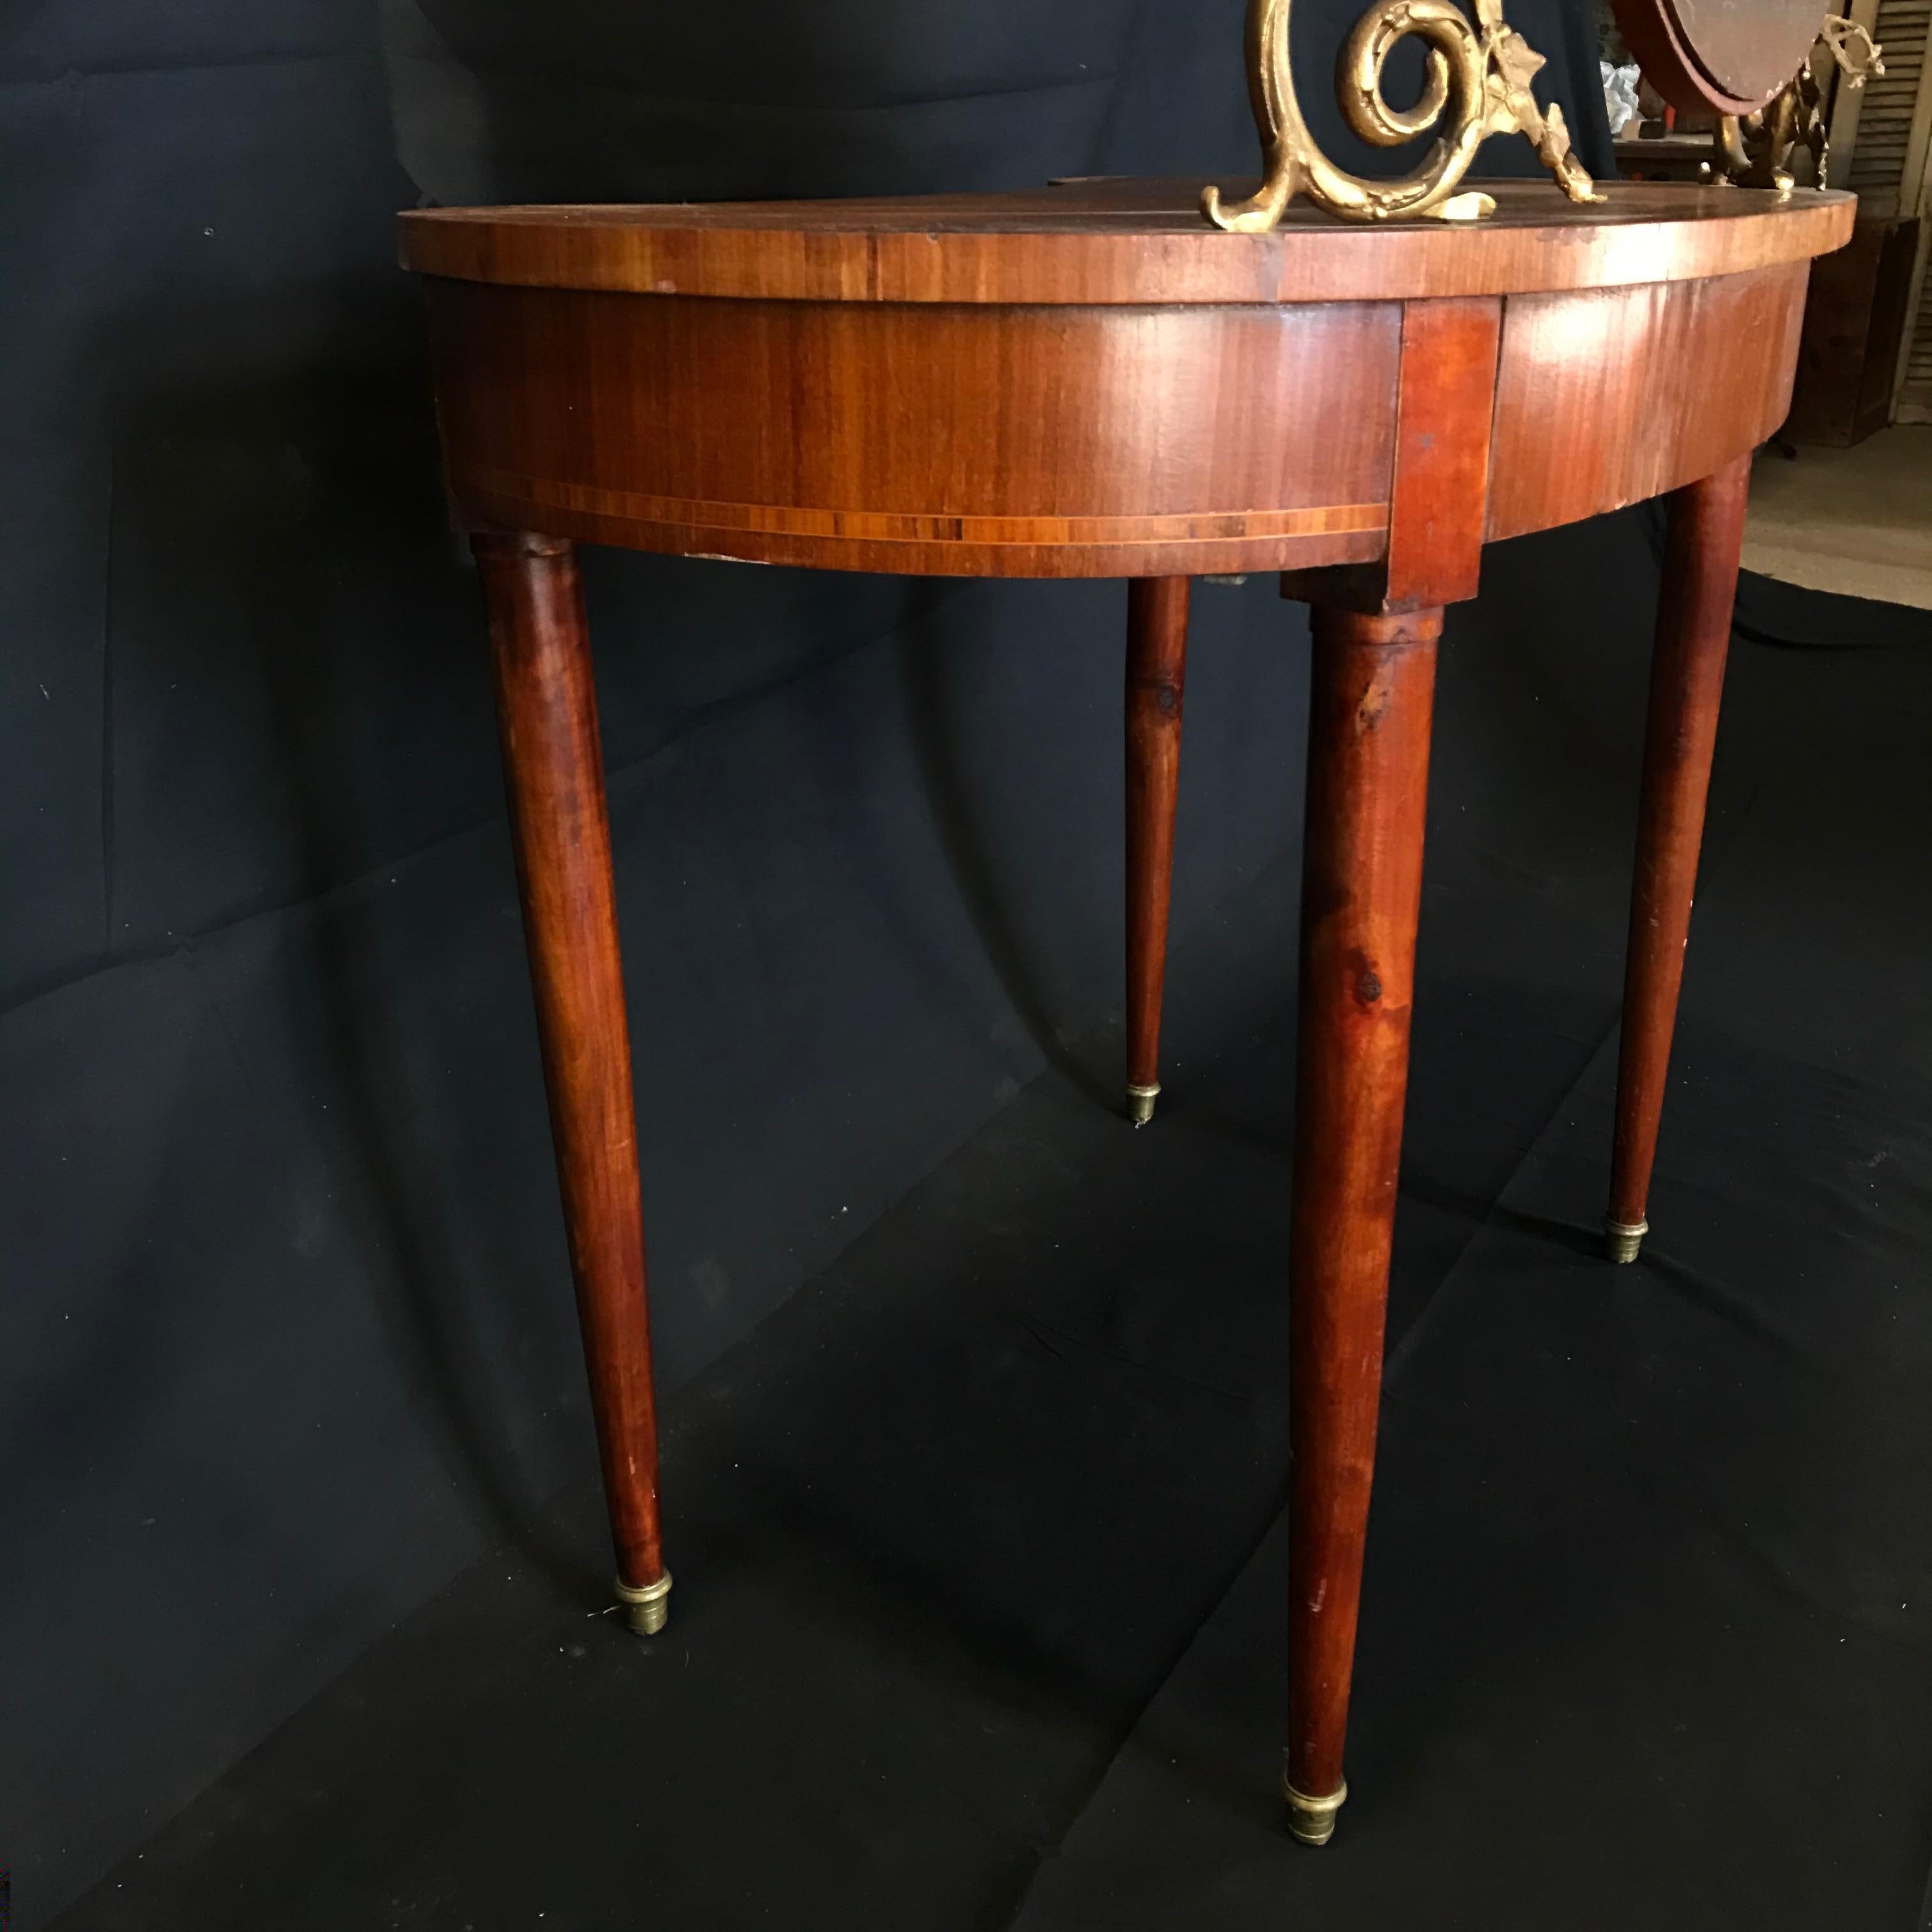 Romantic French Inlaid Walnut and Bronze Dressing Table with Candelabra Arms 12